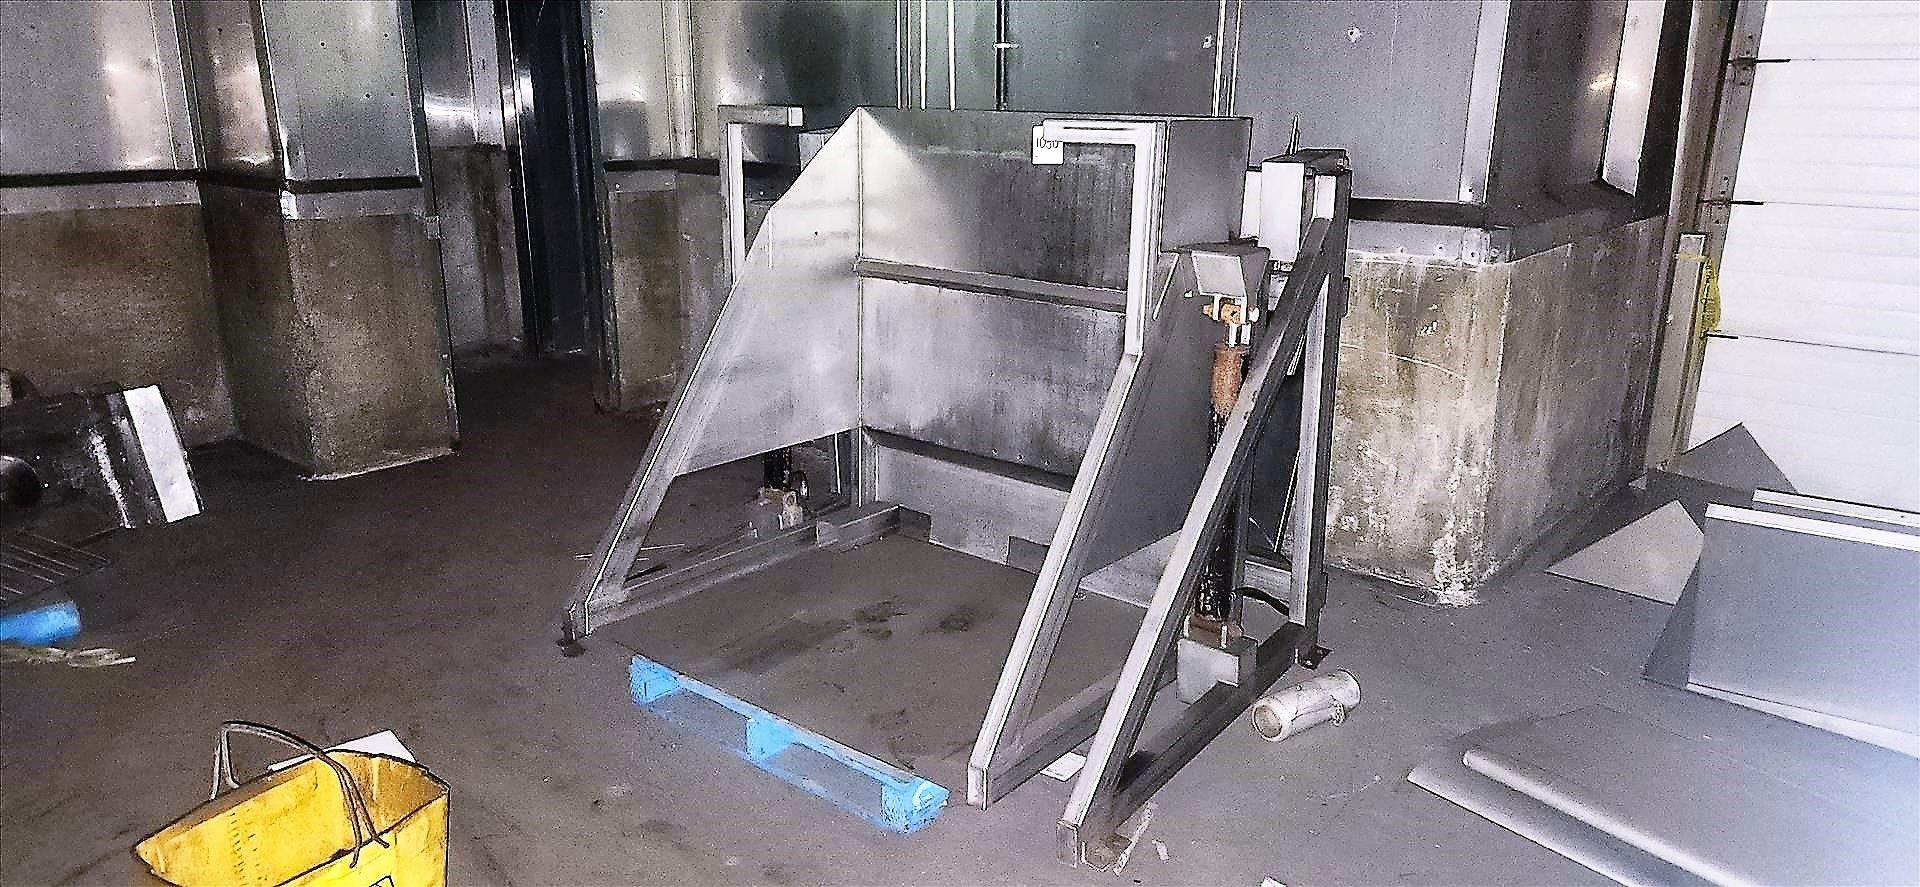 tote dumper, stainless steel, approx. 48 in. x 53 in. x 52 in. pivot point c/w 5 hp hydraulic